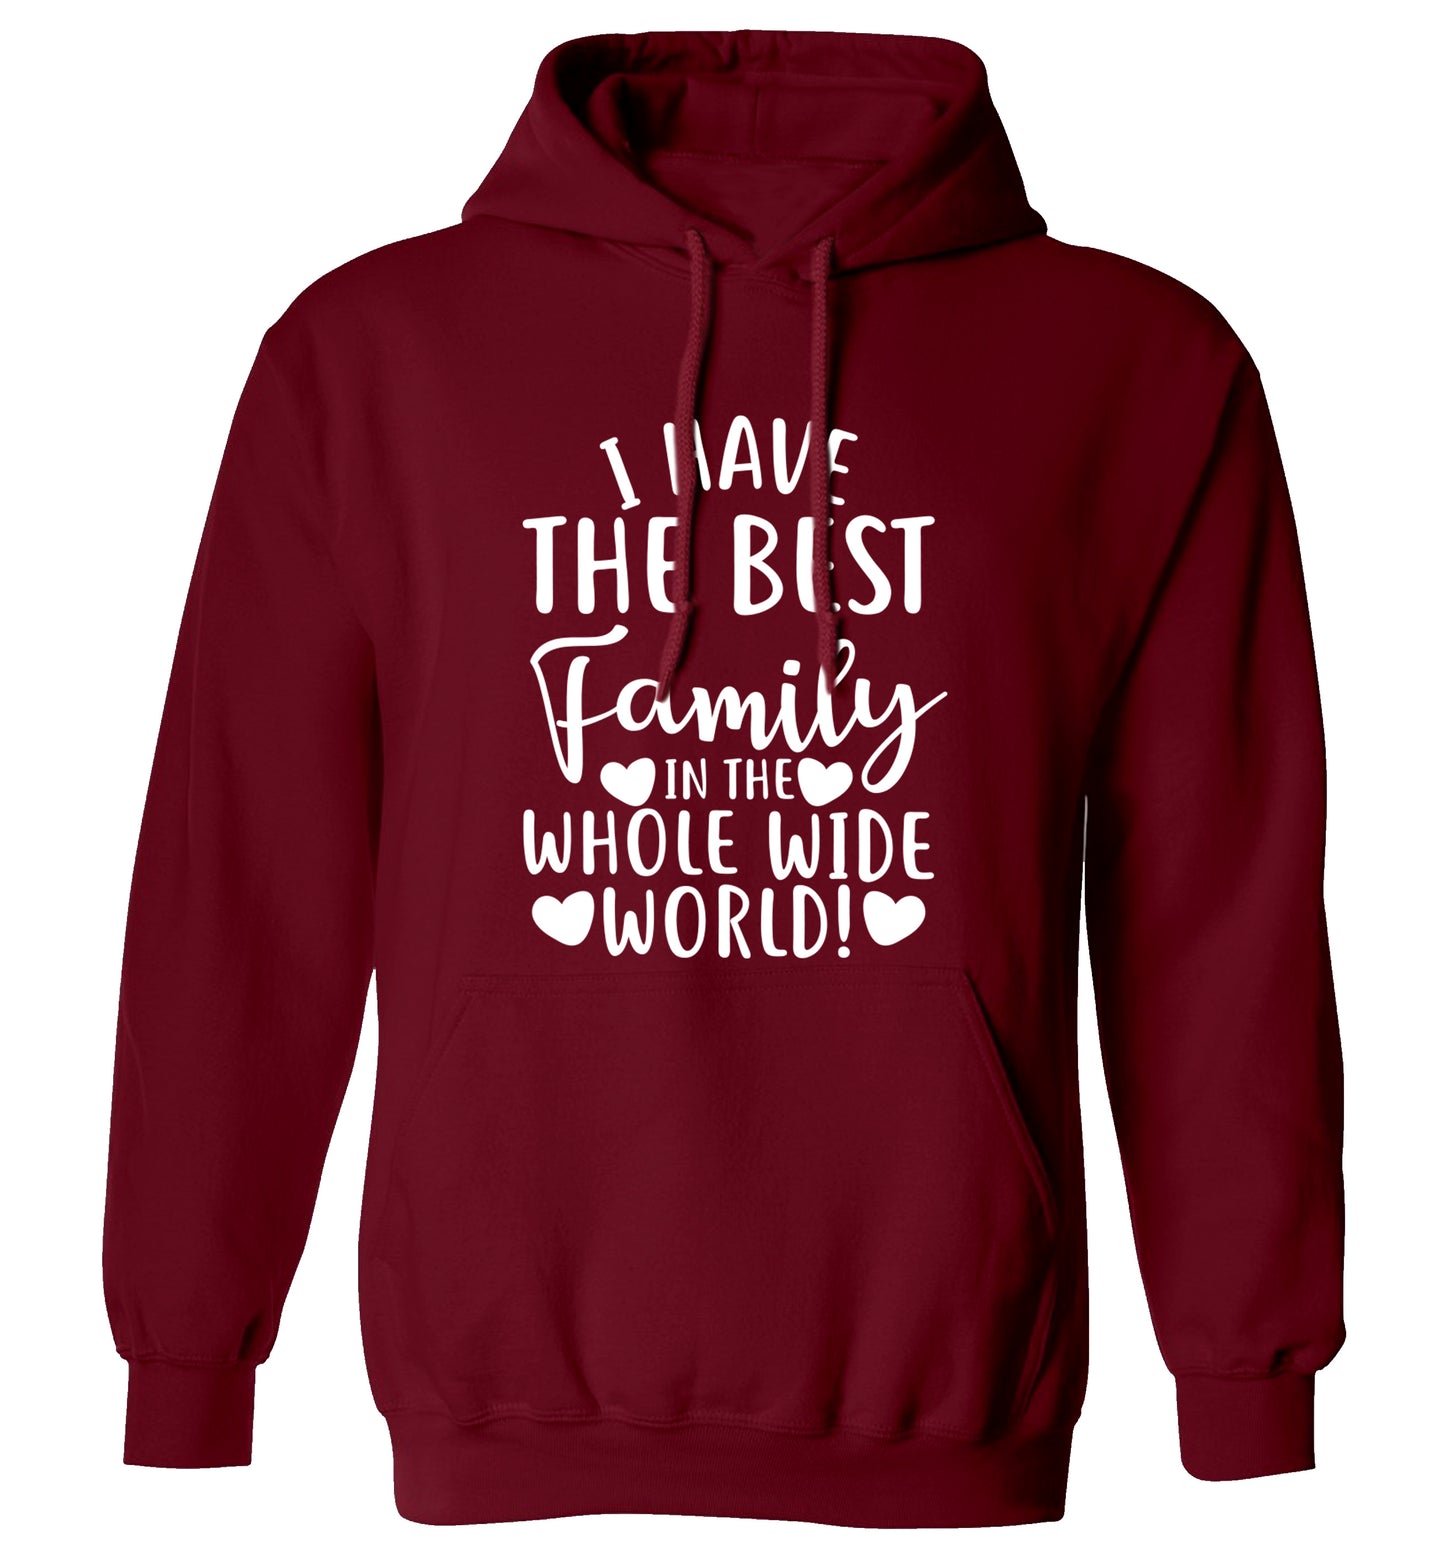 I have the best family in the whole wide world! adults unisex maroon hoodie 2XL